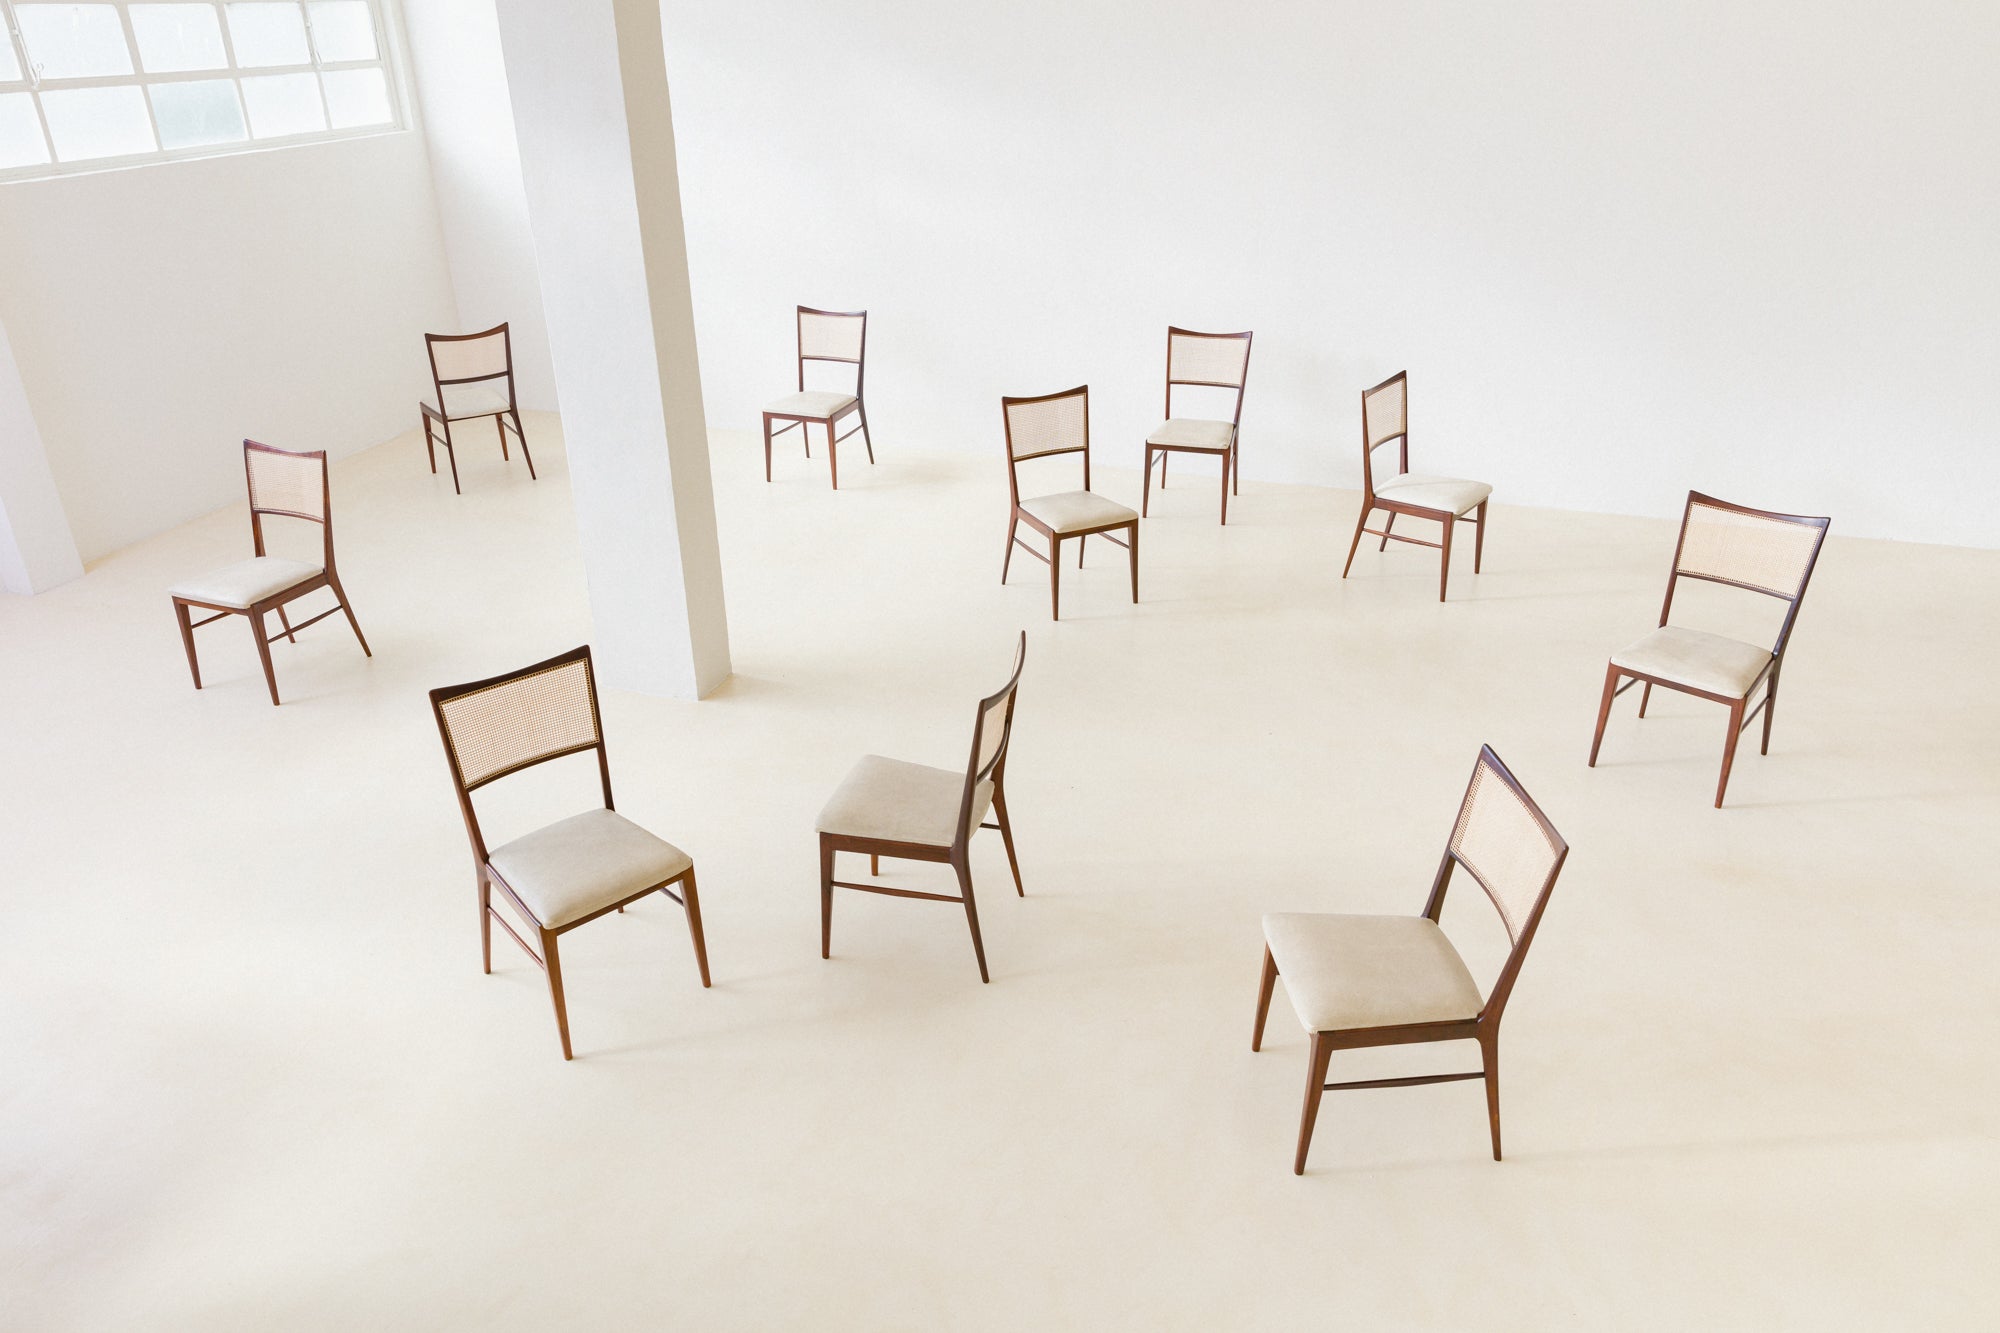 Set composed of ten chairs produced in the 1950s, with authorship still in research by our team. In the market flow, many small manufacturers were inspired by the vanguard production, with Brazilian materials and the 